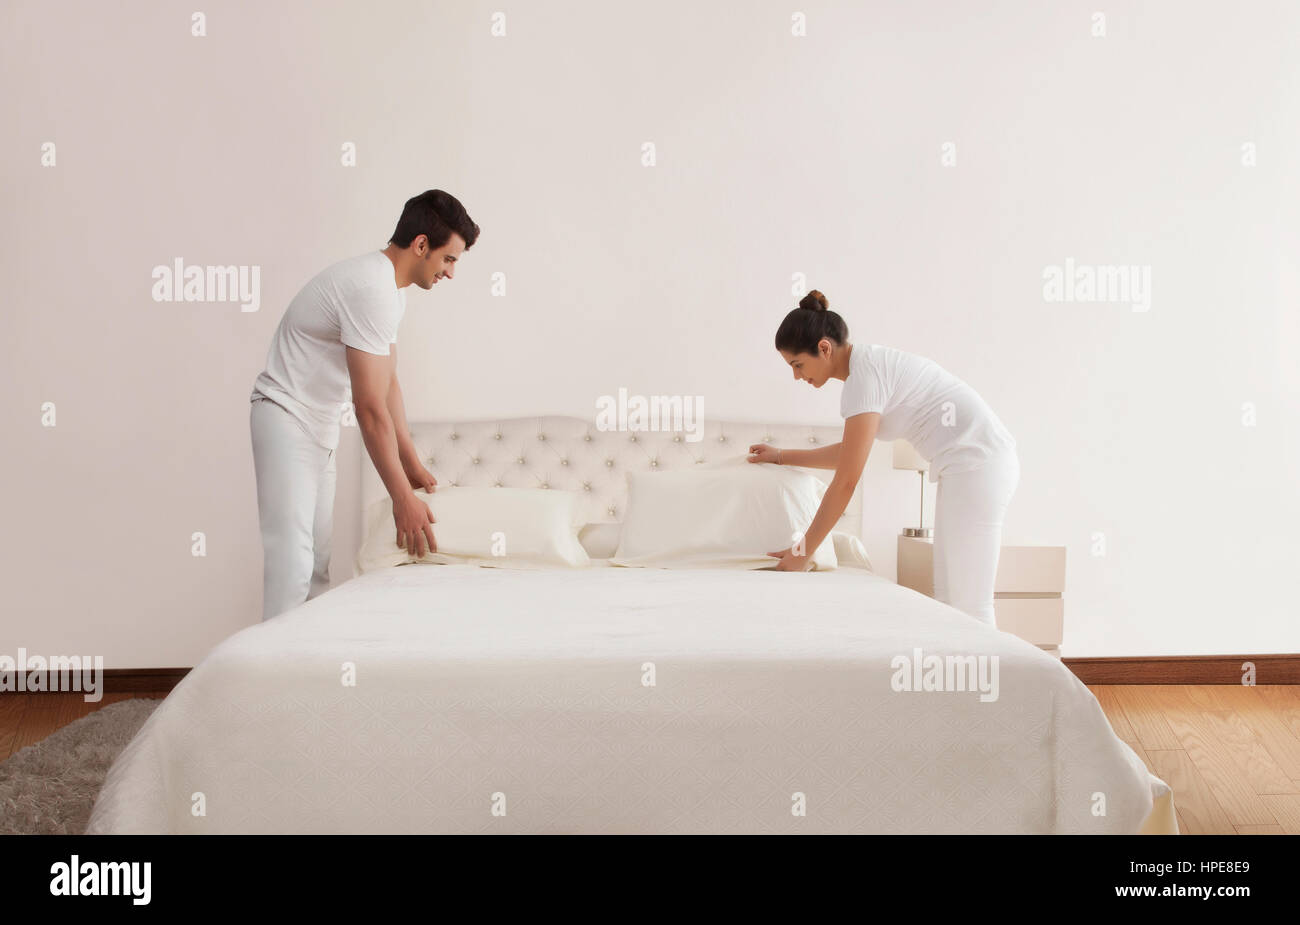 Couple making bed in bedroom Stock Photo